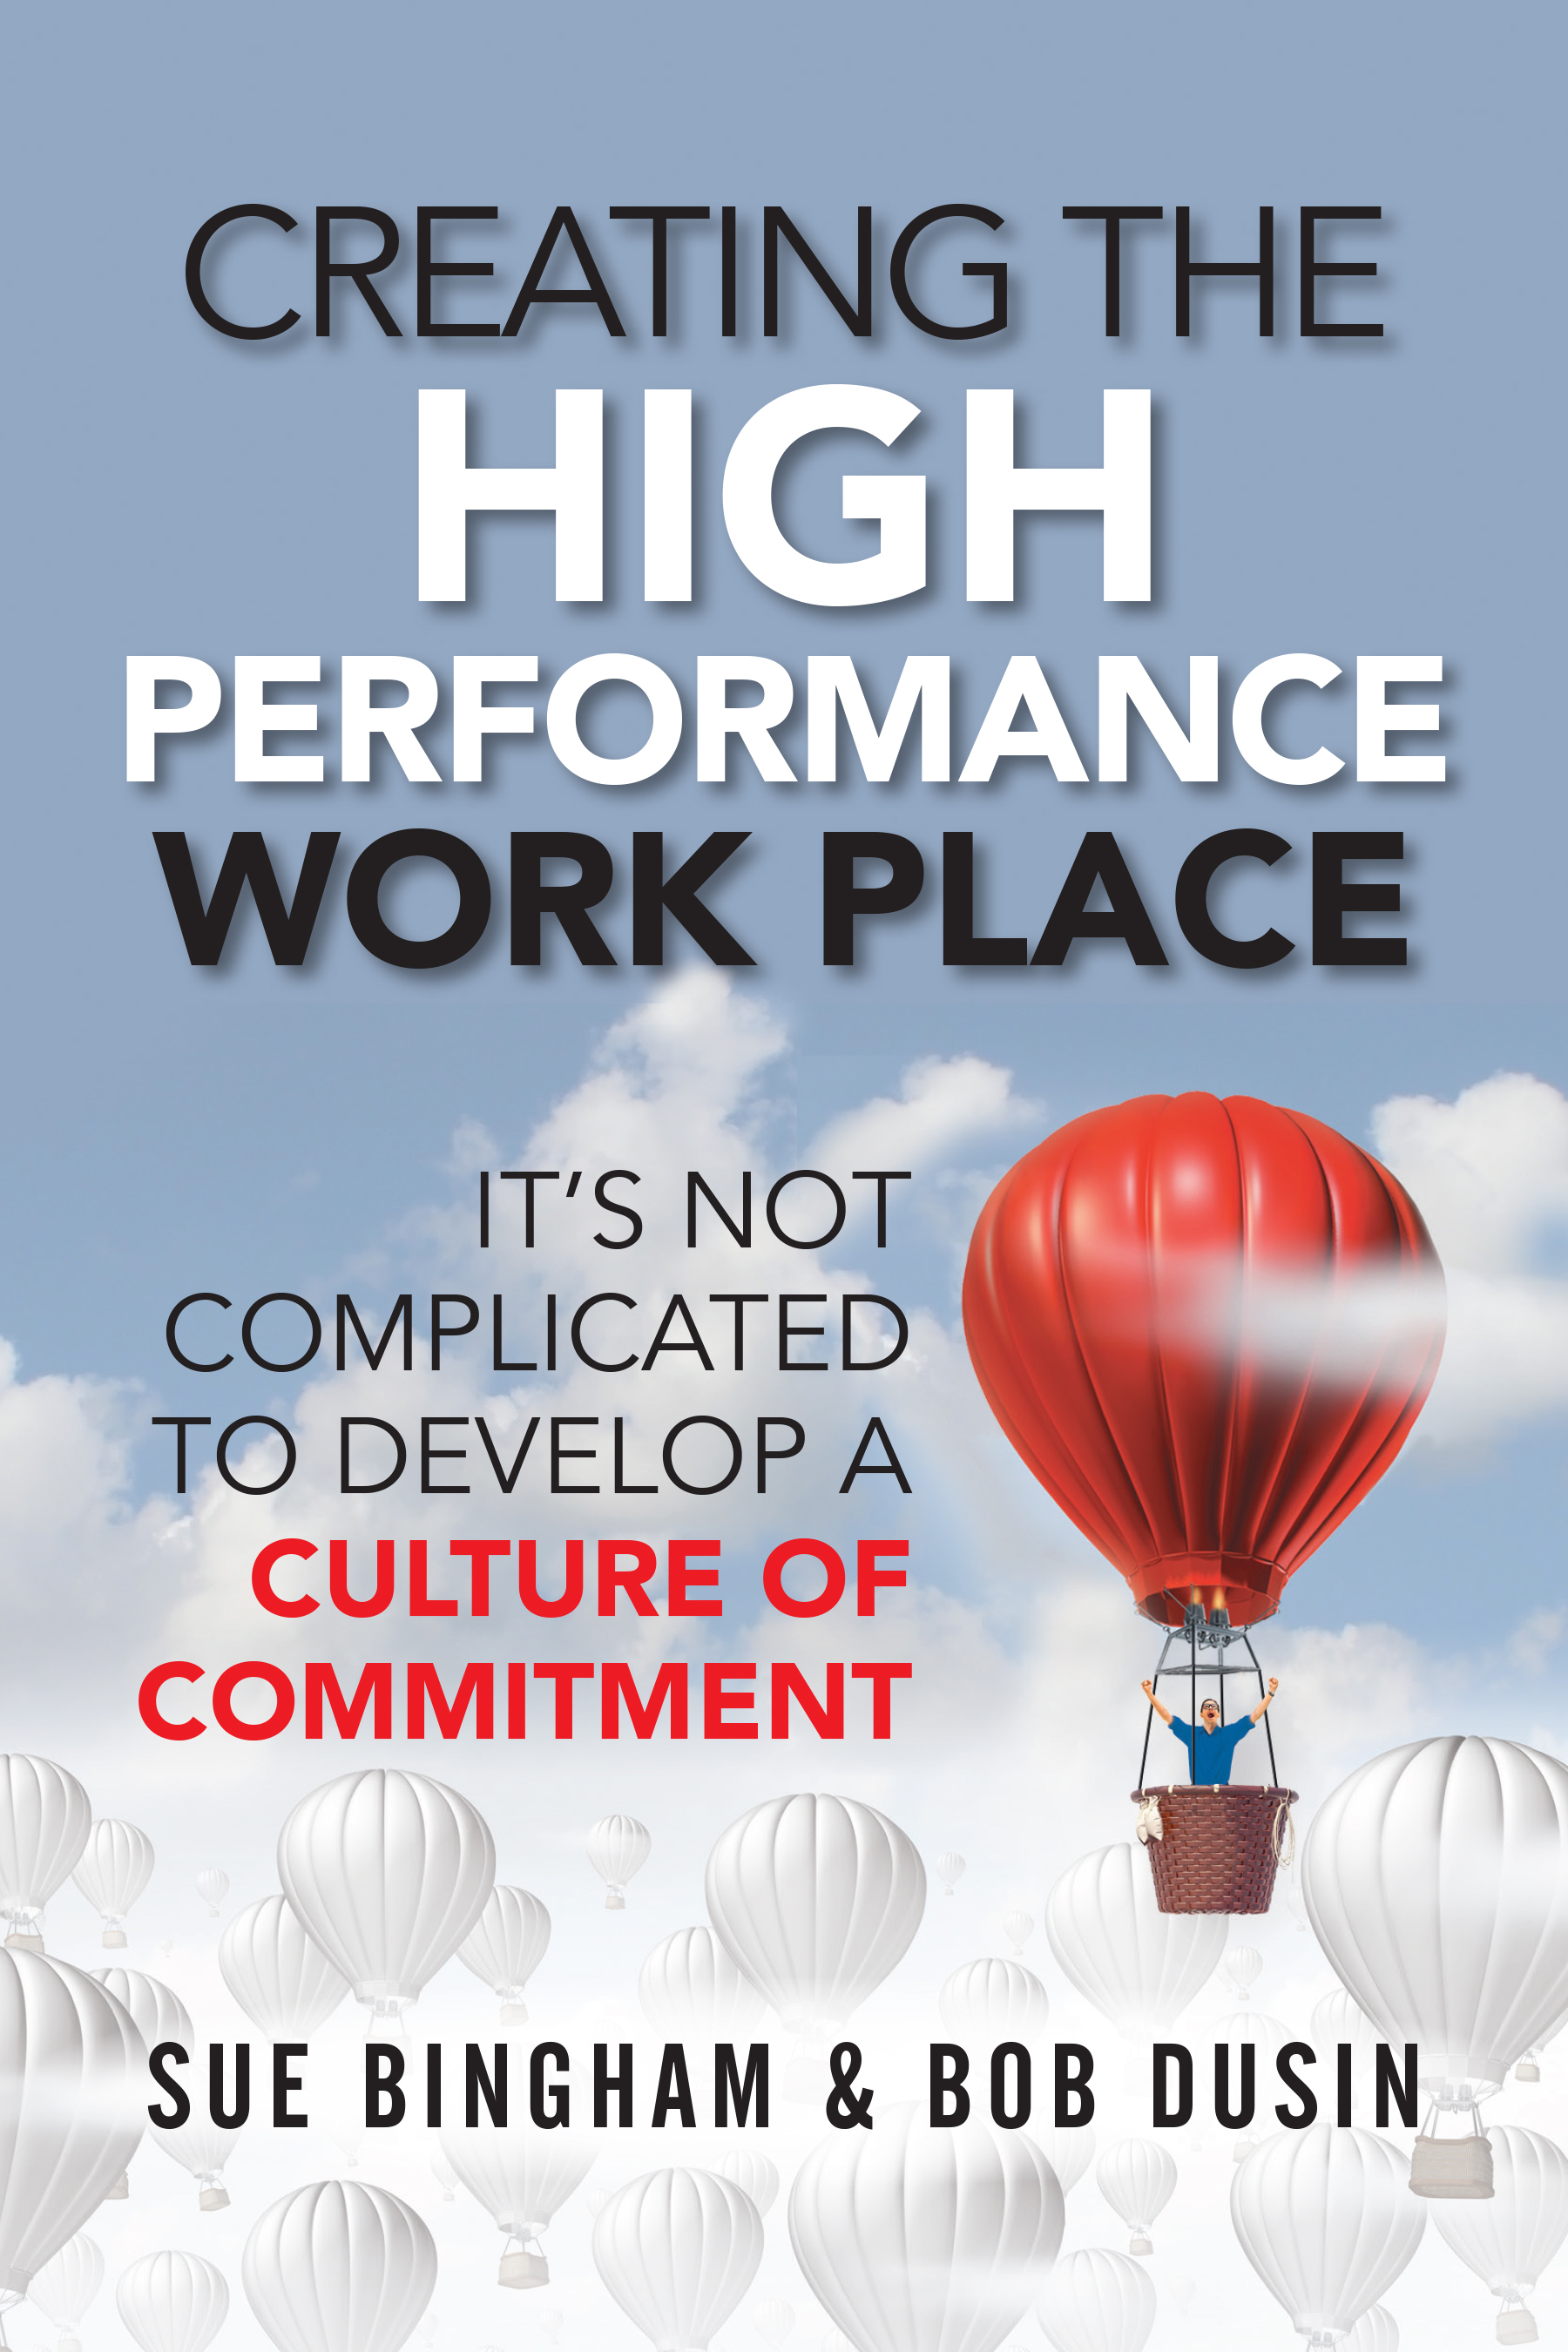 Creating the High Performance Work Place